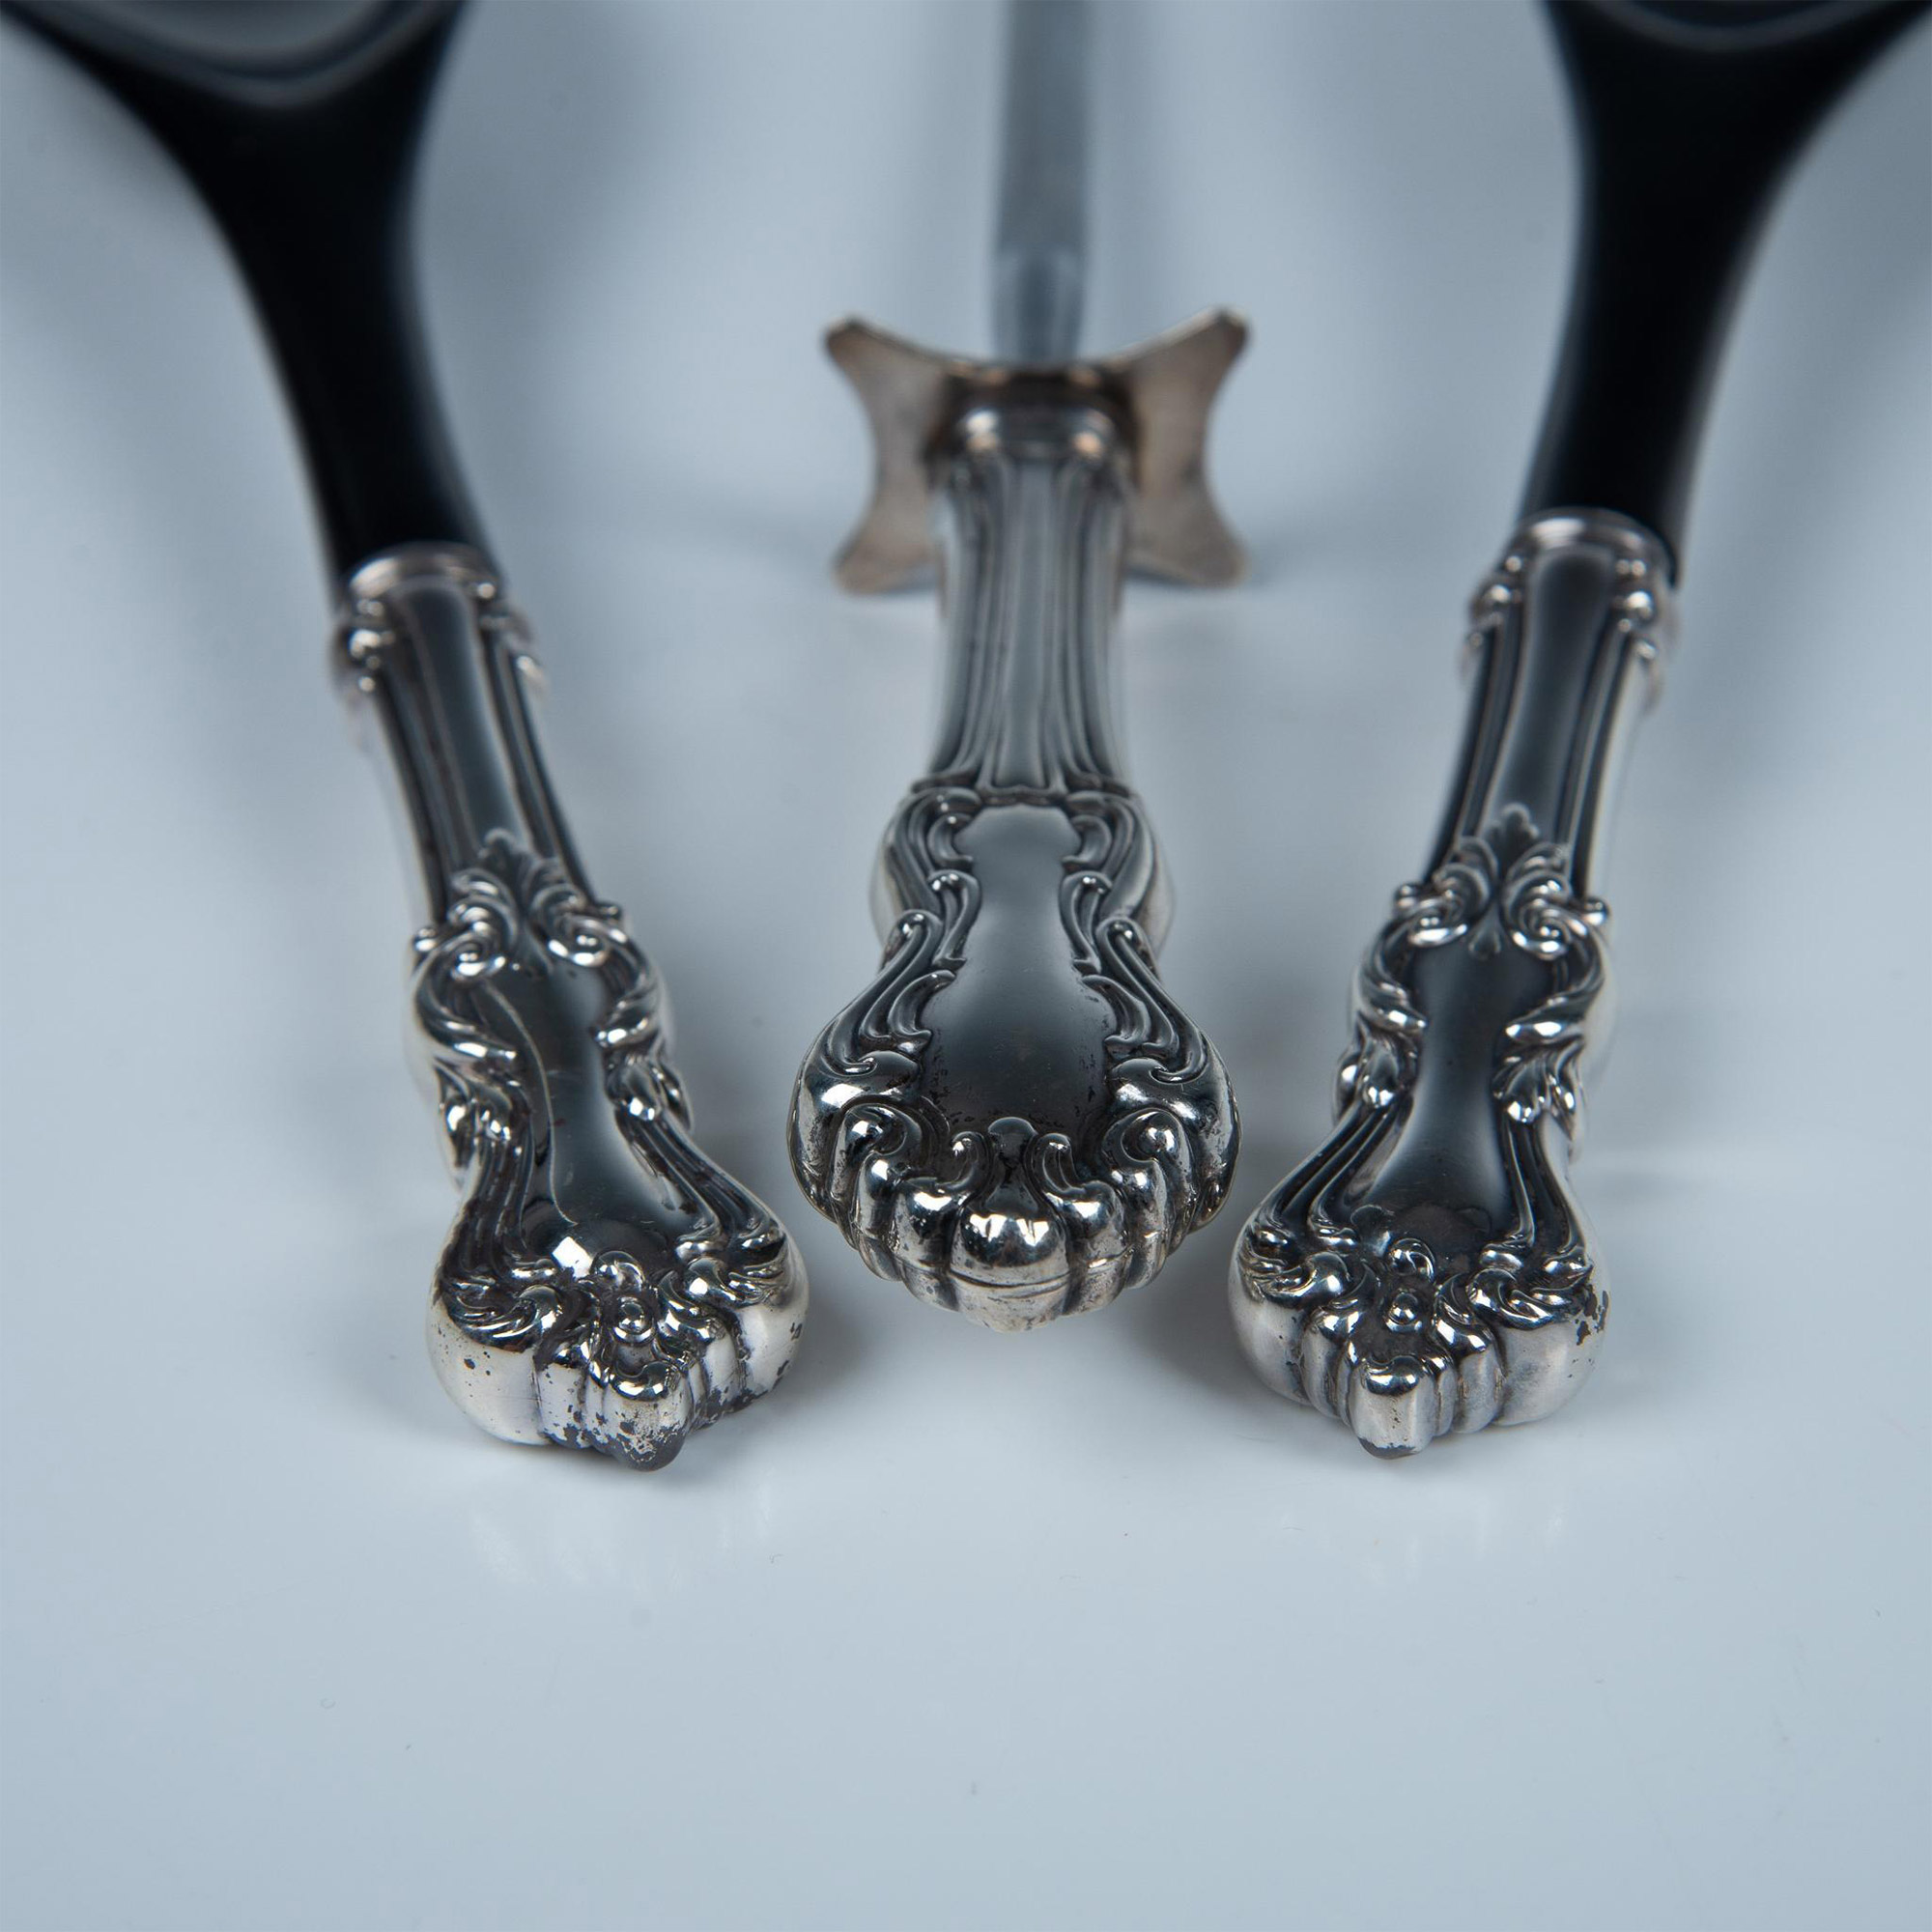 3pc Sterling & Plated Silver Handled Table Service Grouping - Image 3 of 5